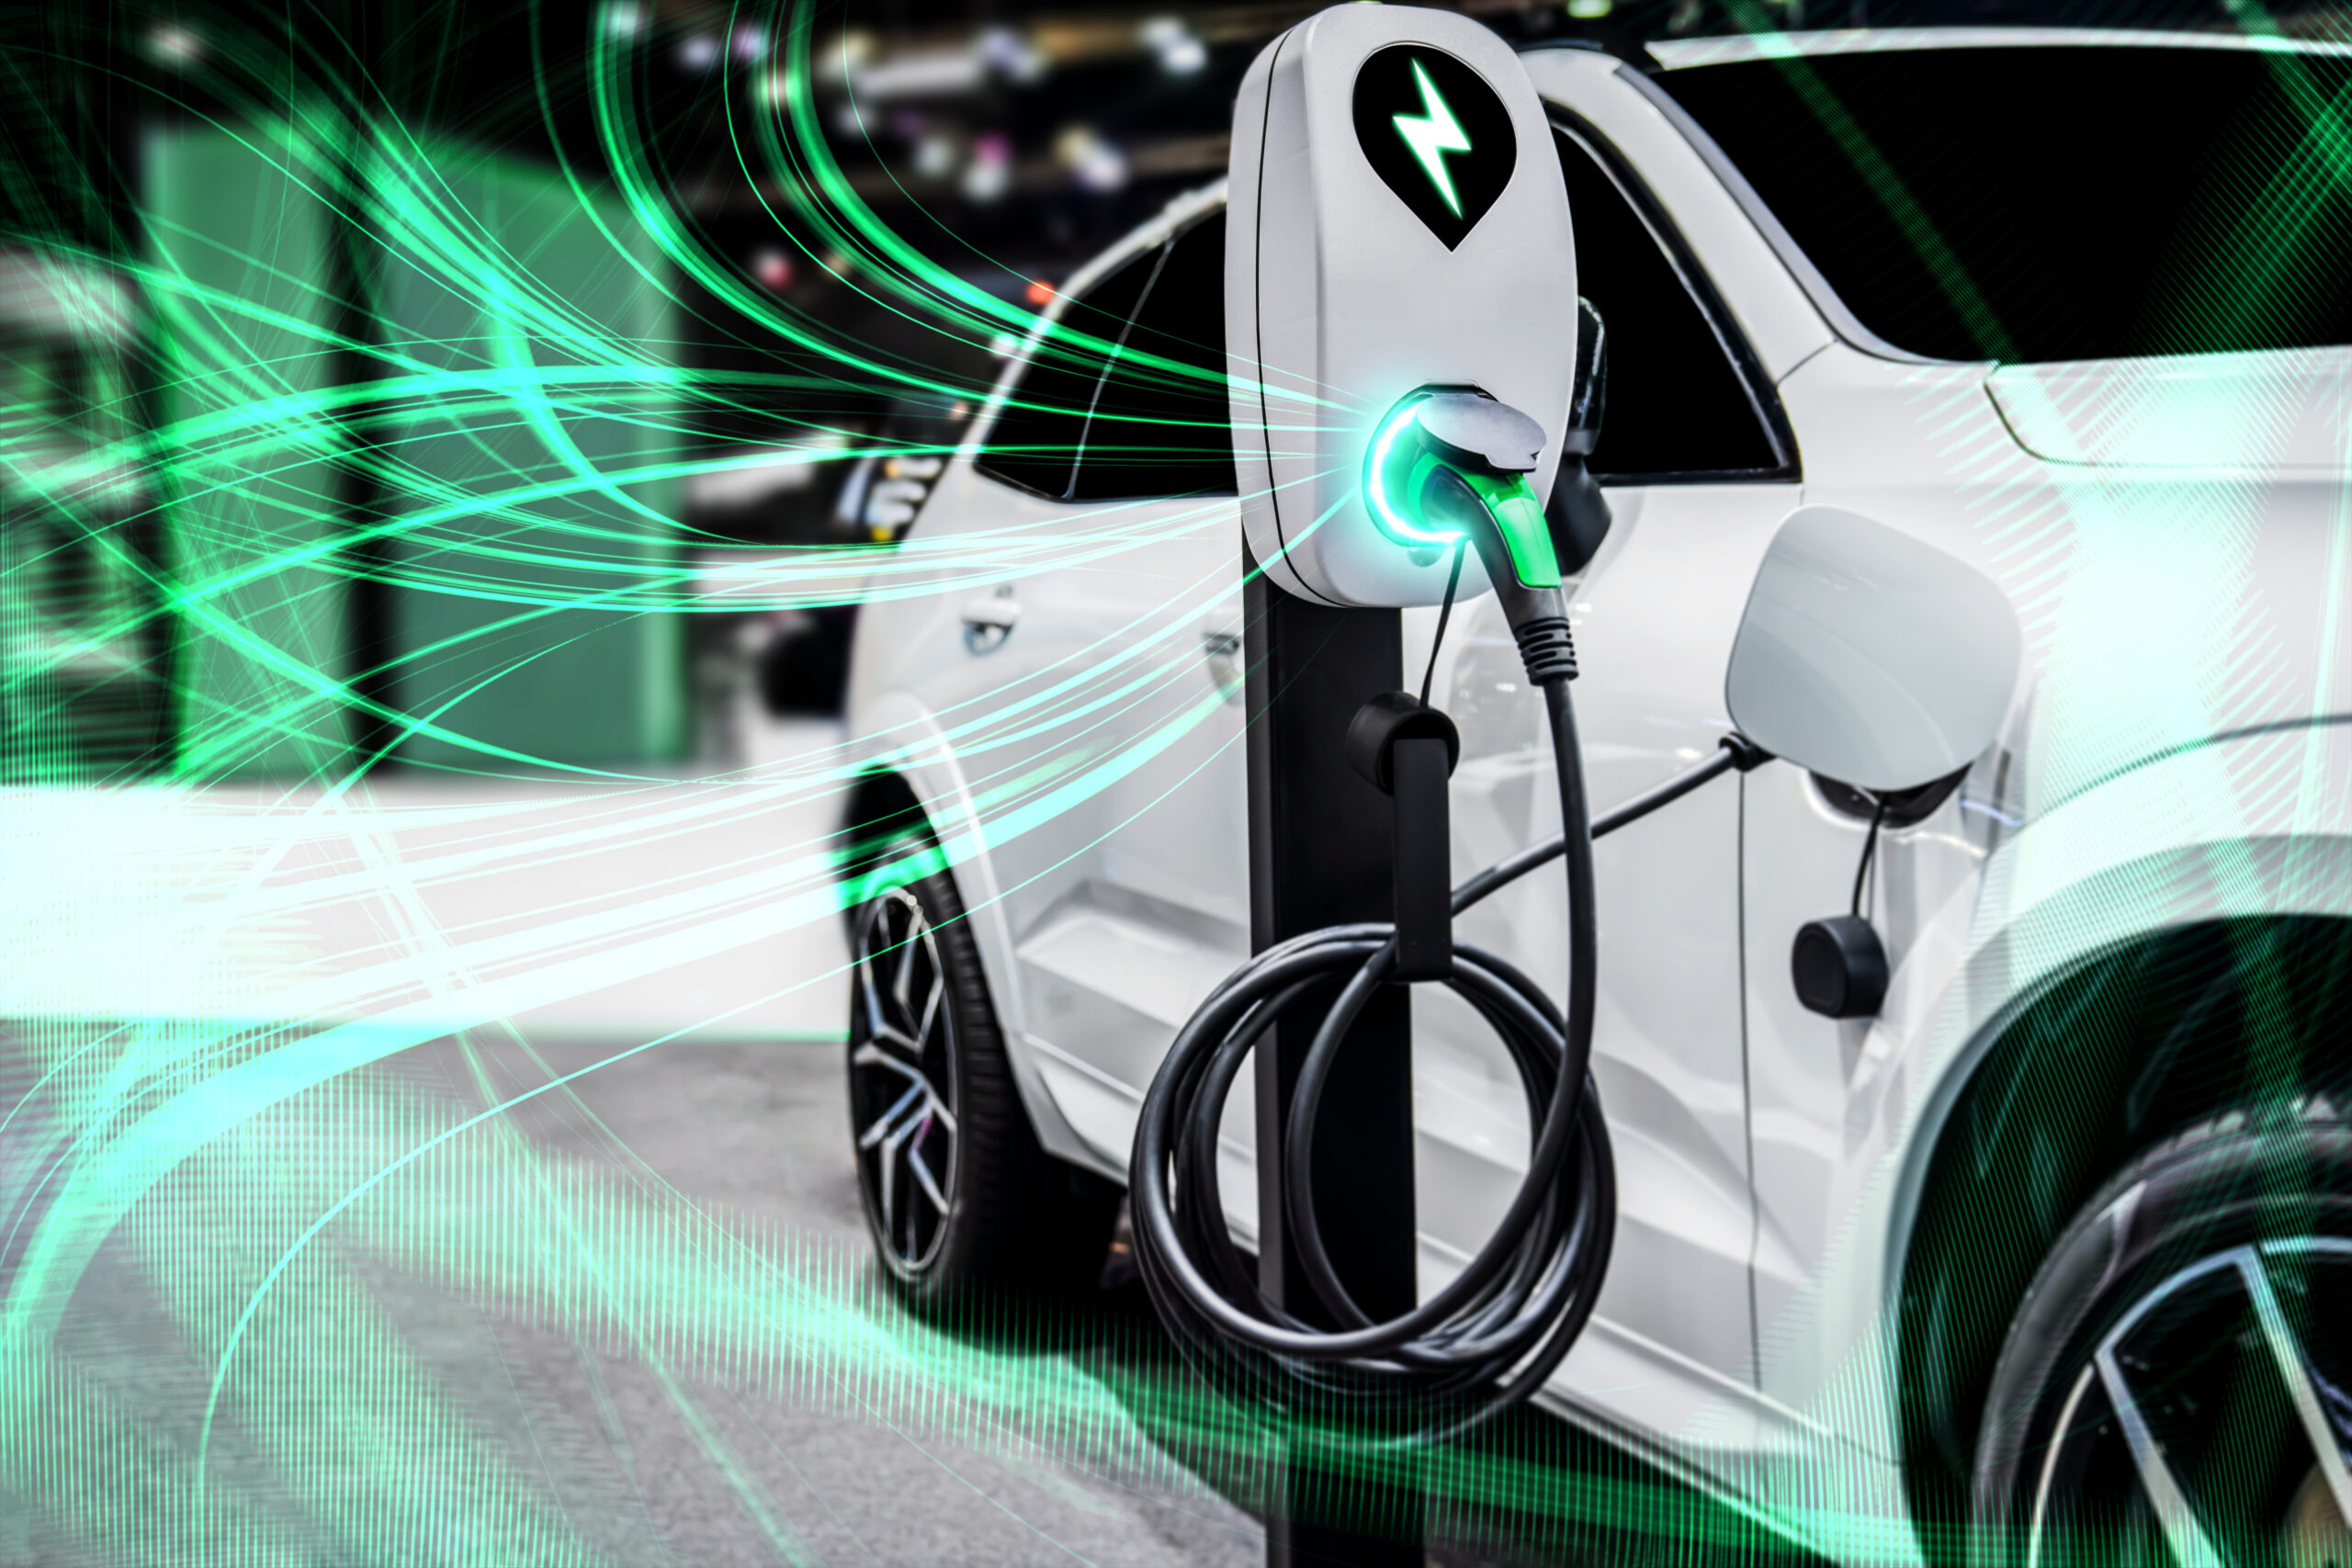 ev-charging-station-for-electric-car-in-concept-of-green-energy-and-eco-power-1348631007_3867x2579-scaled